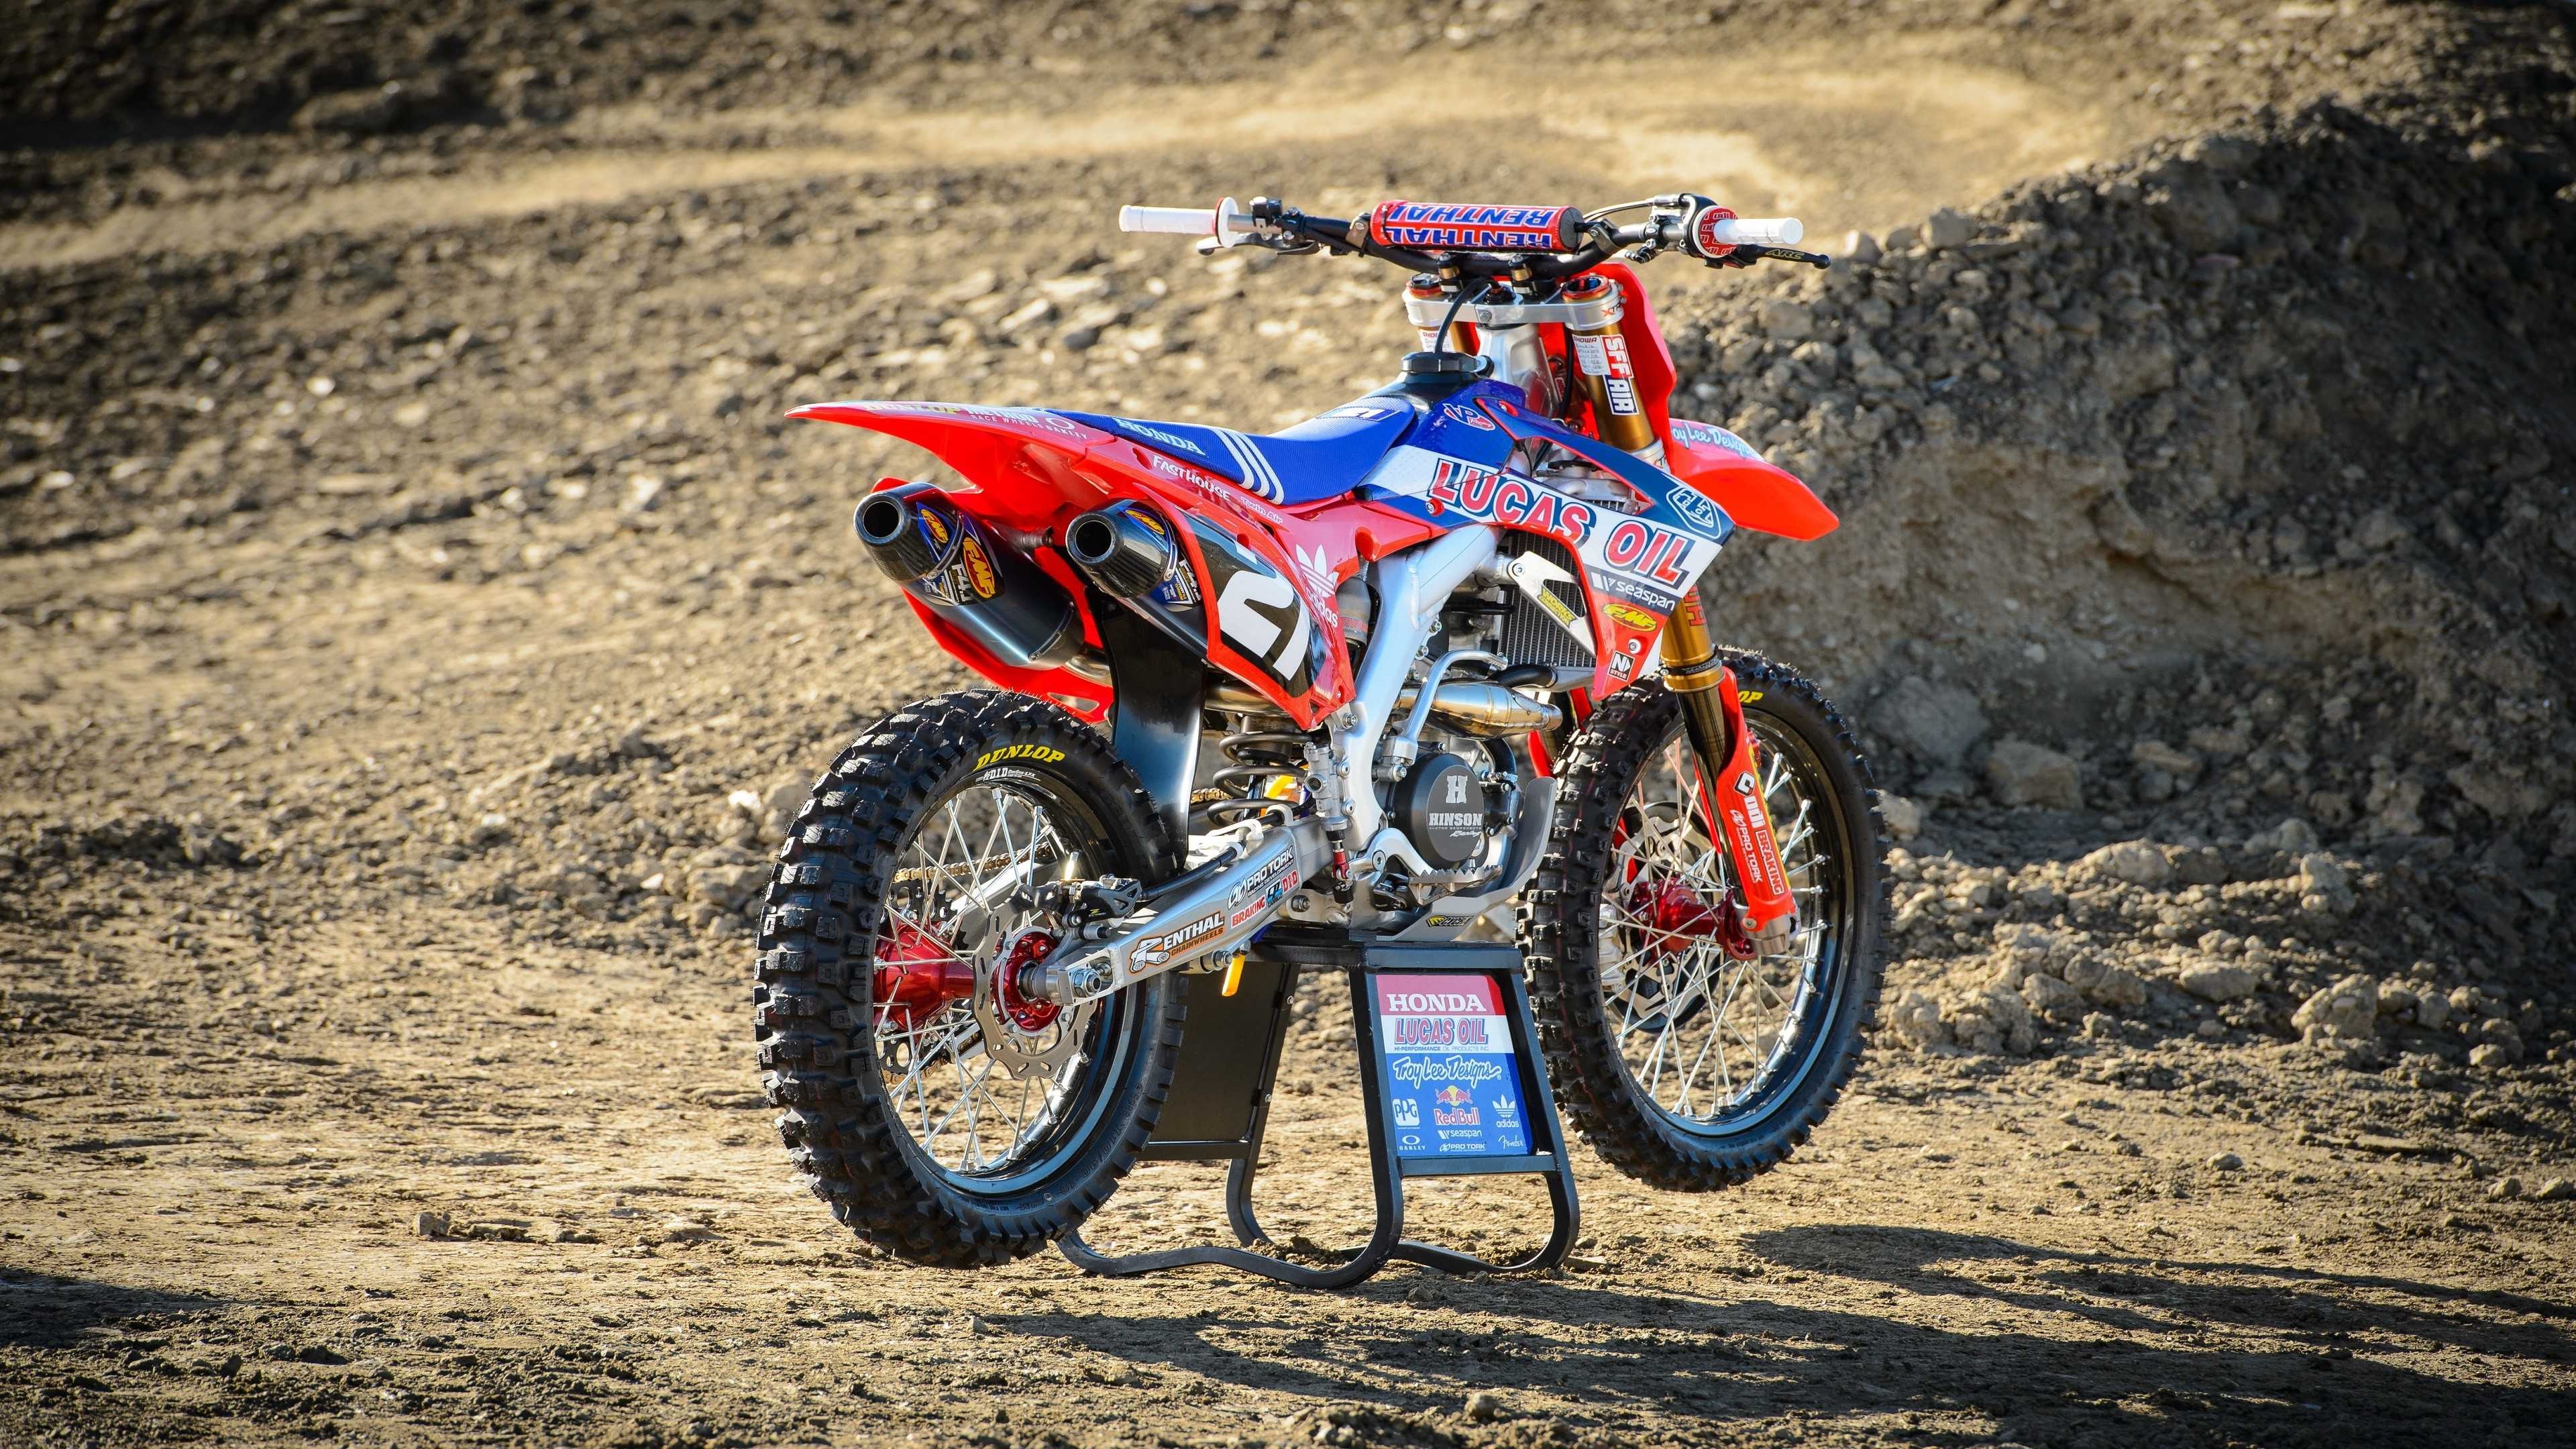 Honda CRF450R, Top-quality wallpapers, Backgrounds and photos, 3840x2160 4K Desktop